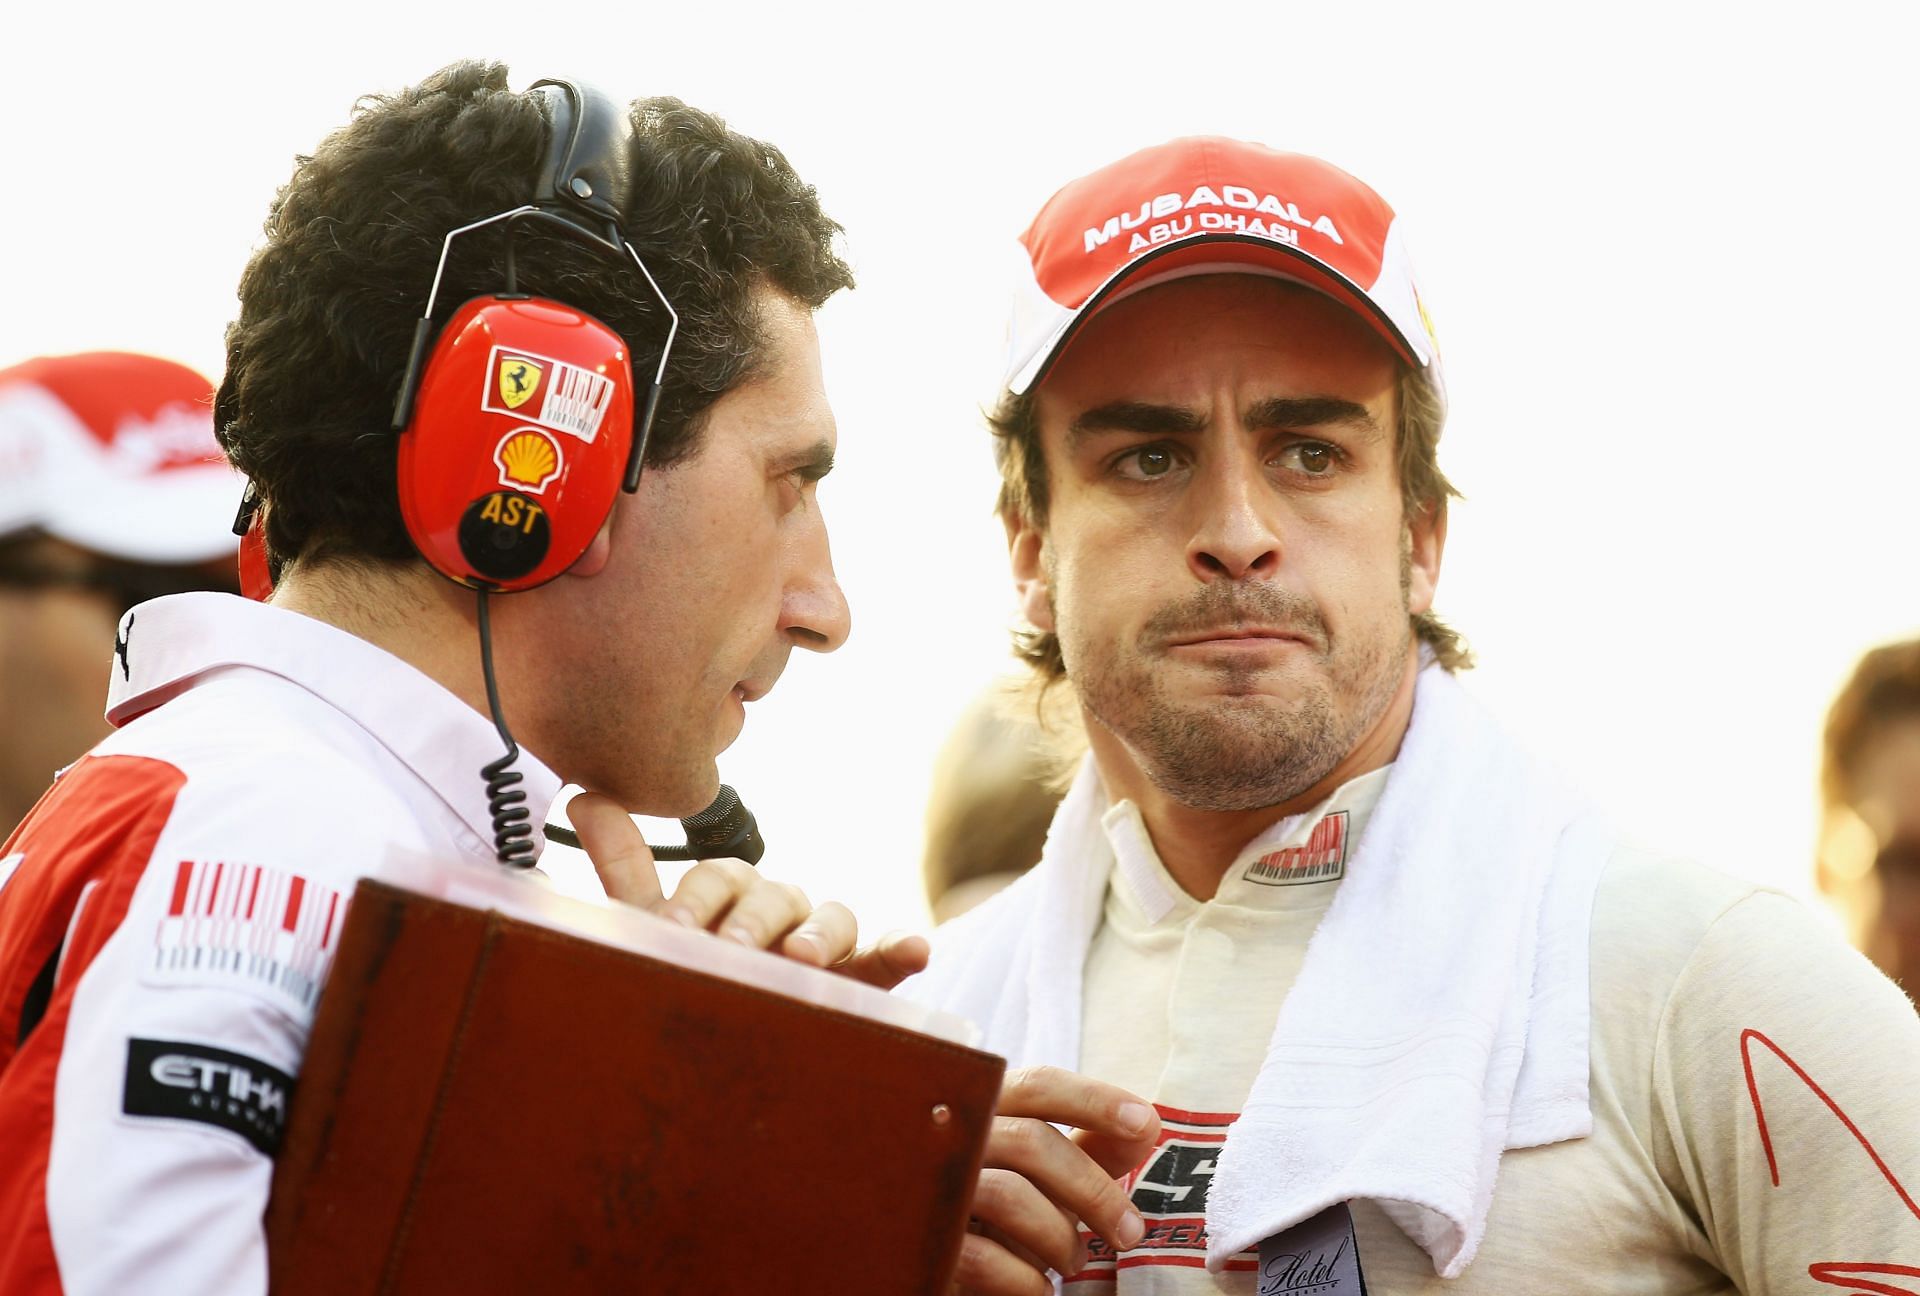 Alonso in 2010 (Photo by Paul Gilham/Getty Images)